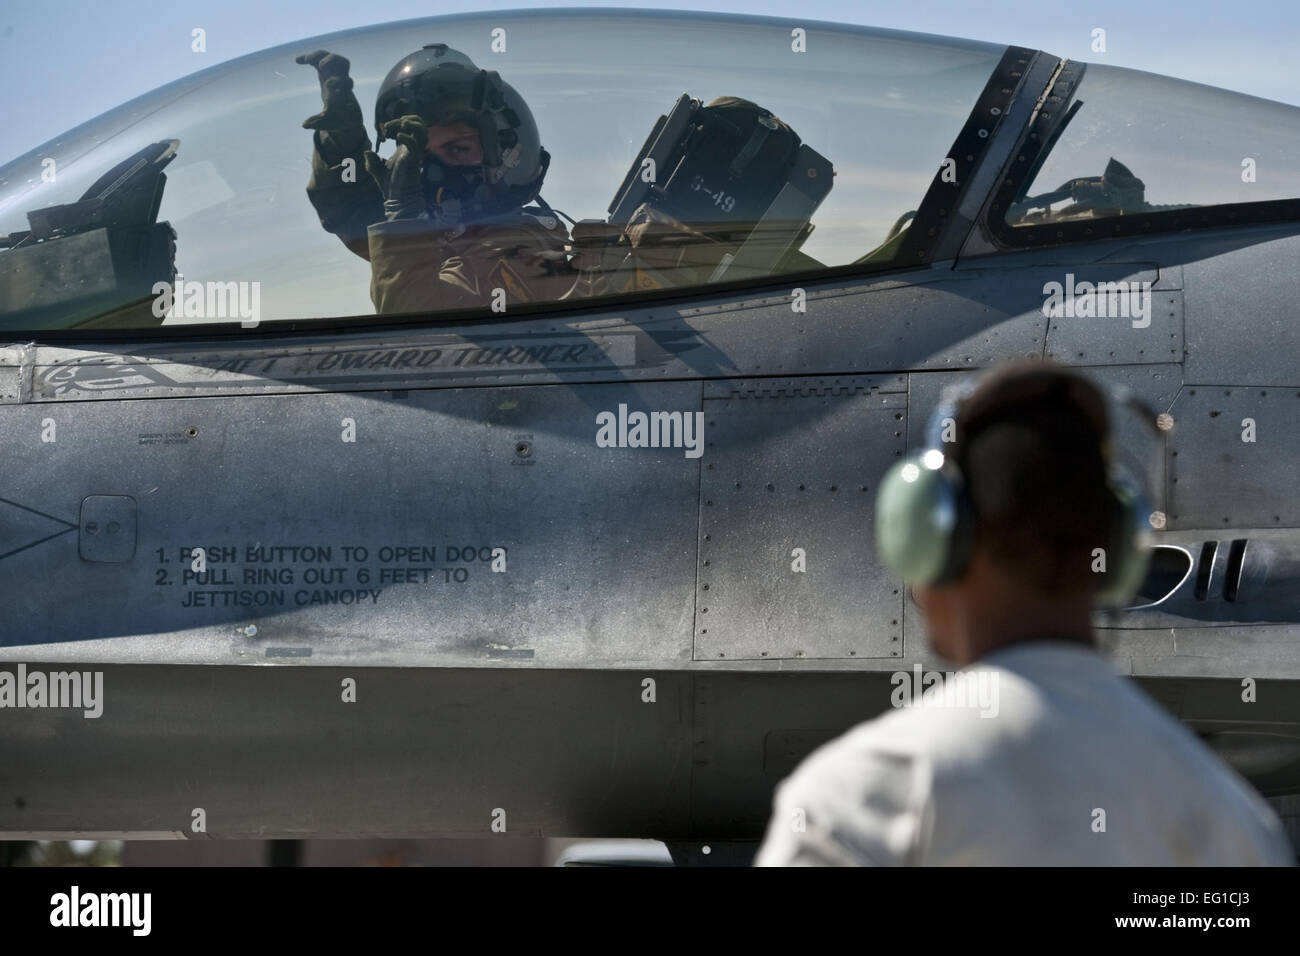 U.S. Air Force Capt. Jeremy Nolting, a pilot from the 79th Fighter Squadron, Shaw Air Force Base, S.C., shows the 79th FS "tiger claw" sign from the cockpit of a F-16 Fighting Falcon before departing on a training mission at Nellis Air Force Base, Nev., during exercise Green Flag West 11-6, April 20, 2011. Green Flag West replicates irregular warfare conditions currently found in Southwest Asia. Aircrews, work closely with Air Force joint terminal attack controllers. Pilots train for a missions such as close air support, and aerial reconnaissance. Stock Photo